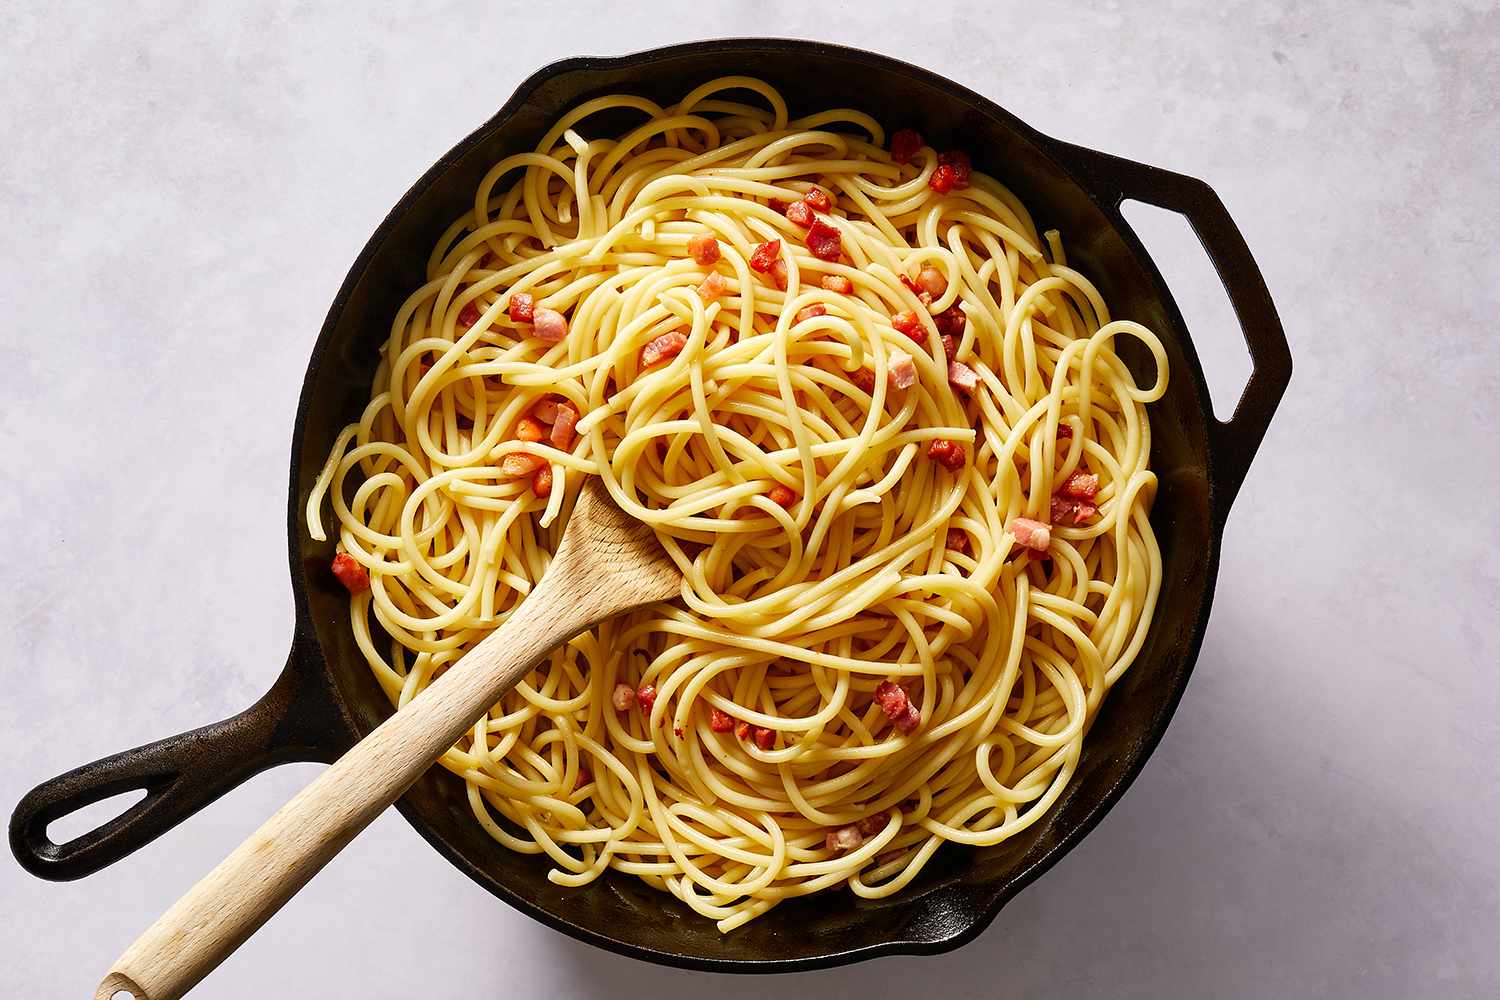 Pancetta and pasta being cooked and stirred together in a cast iron pan